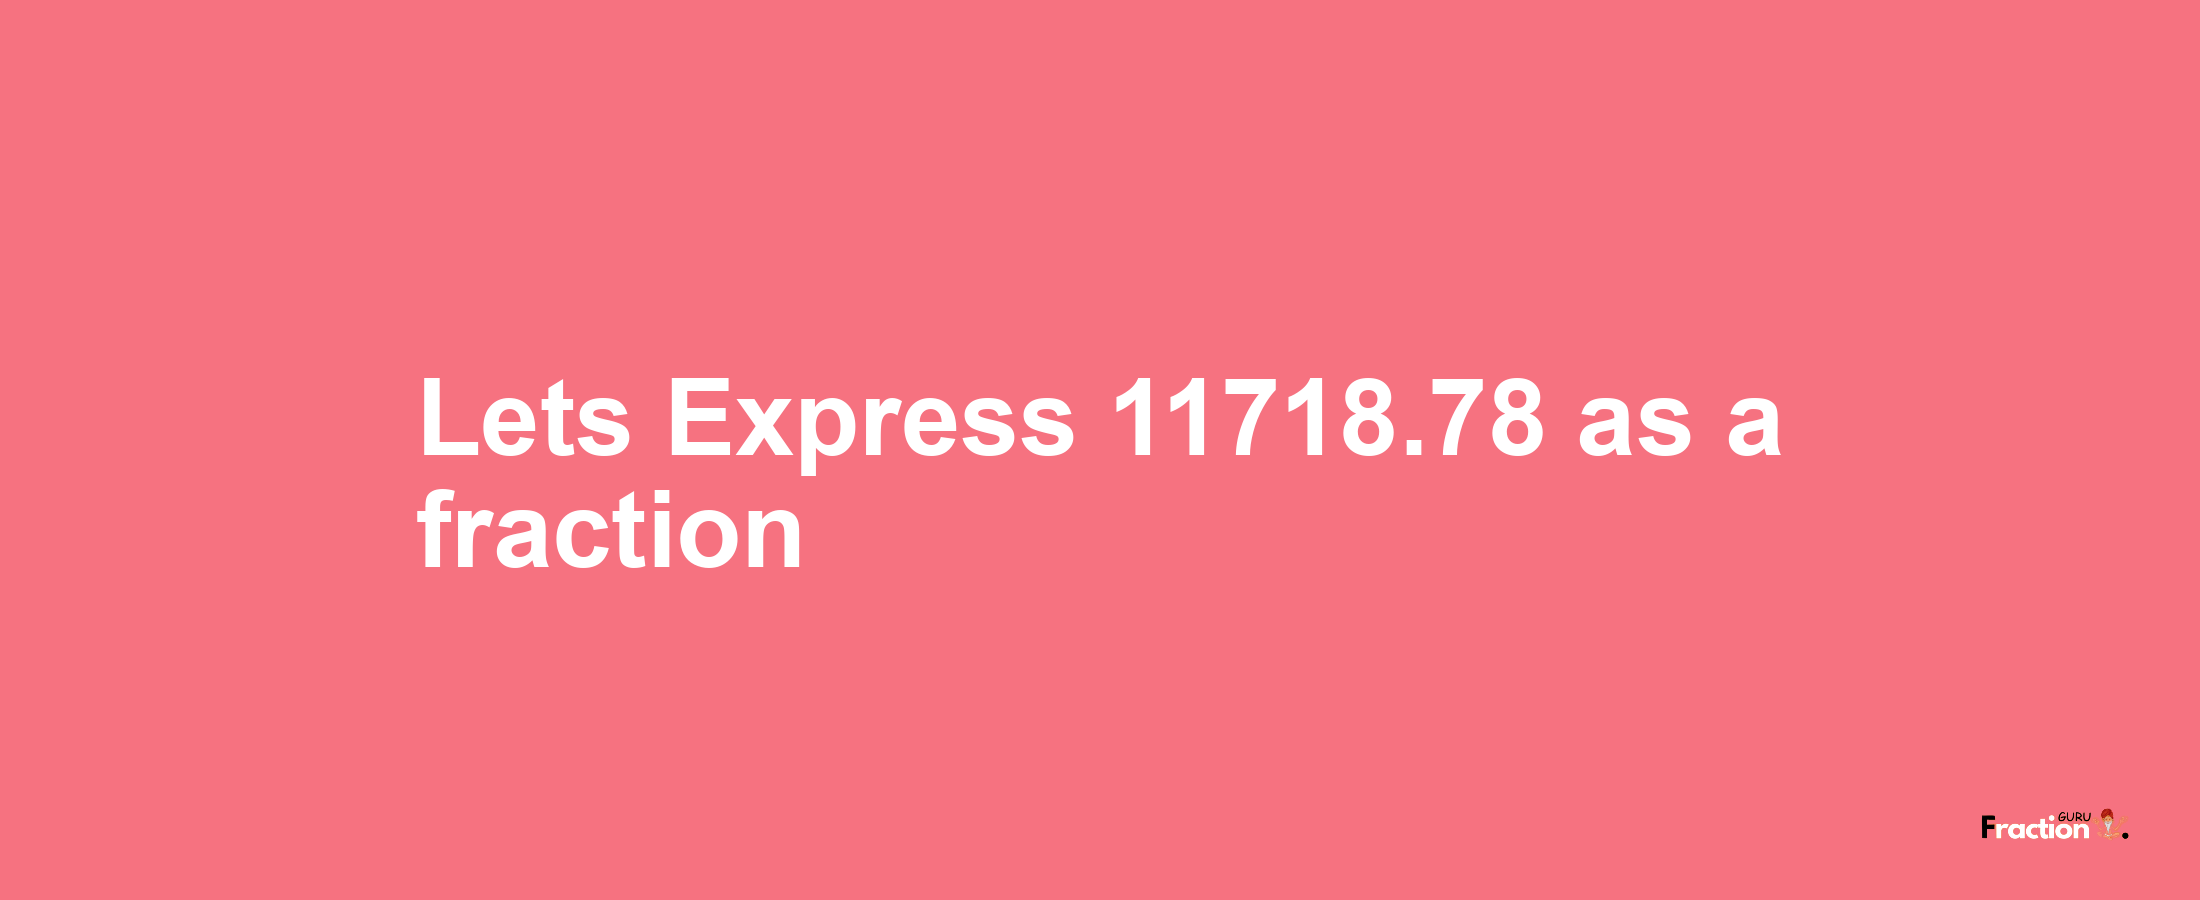 Lets Express 11718.78 as afraction